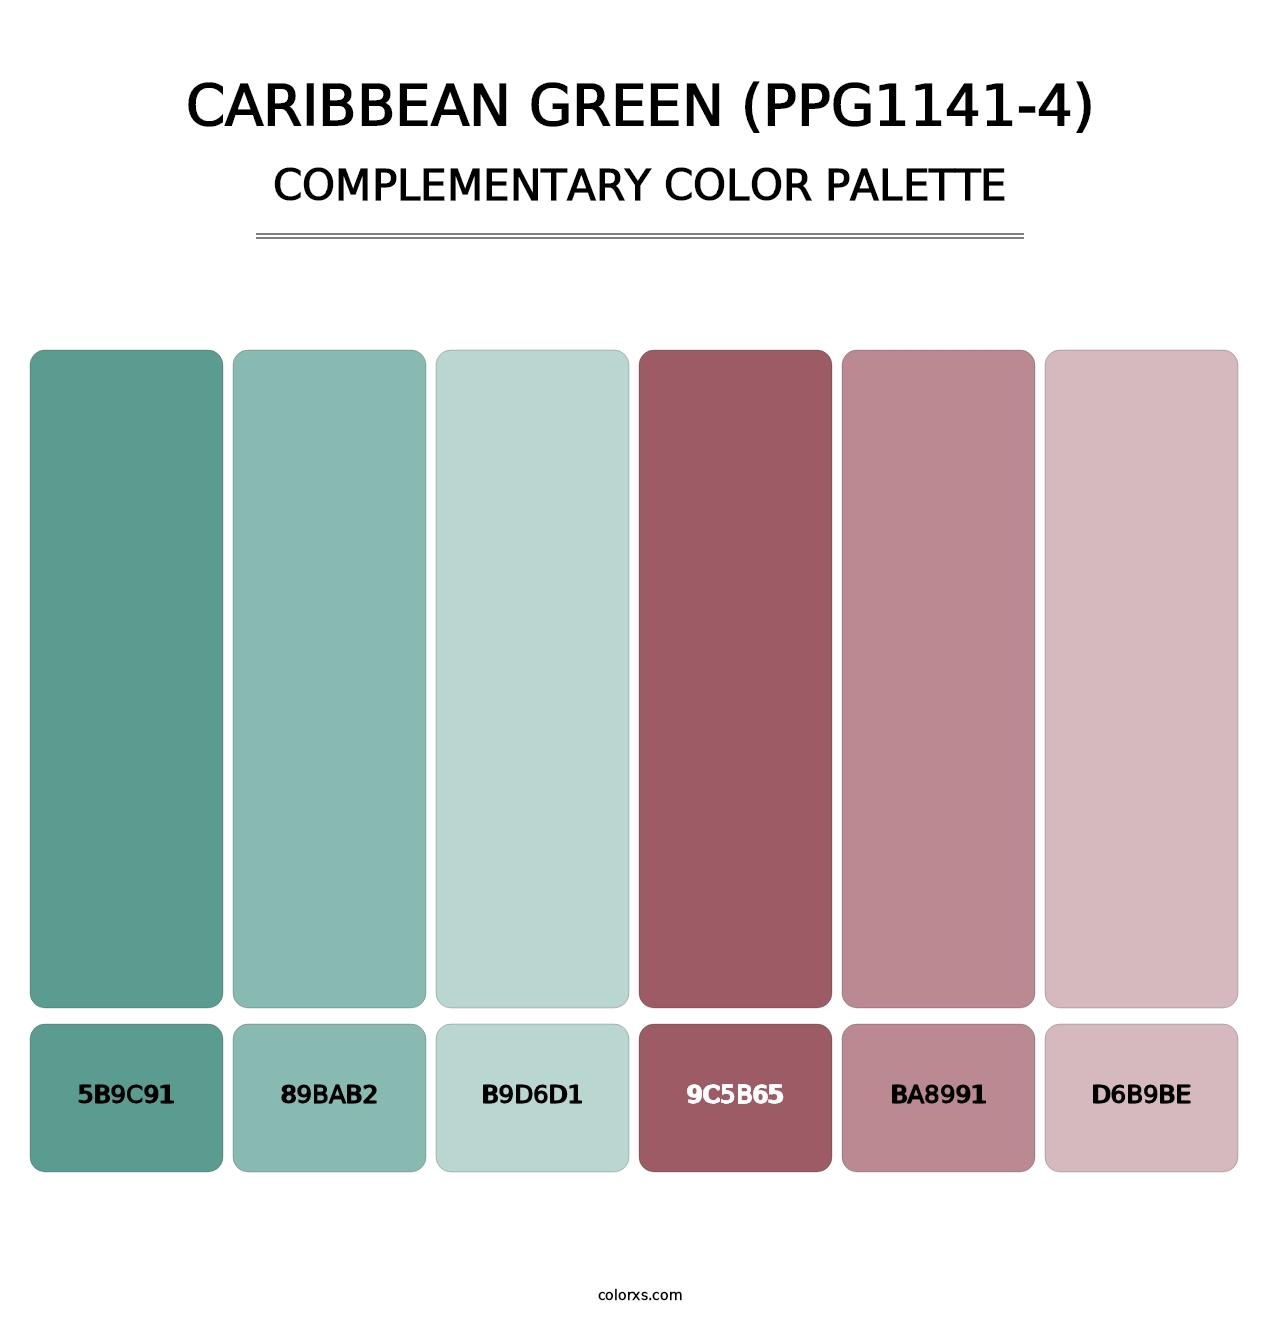 Caribbean Green (PPG1141-4) - Complementary Color Palette